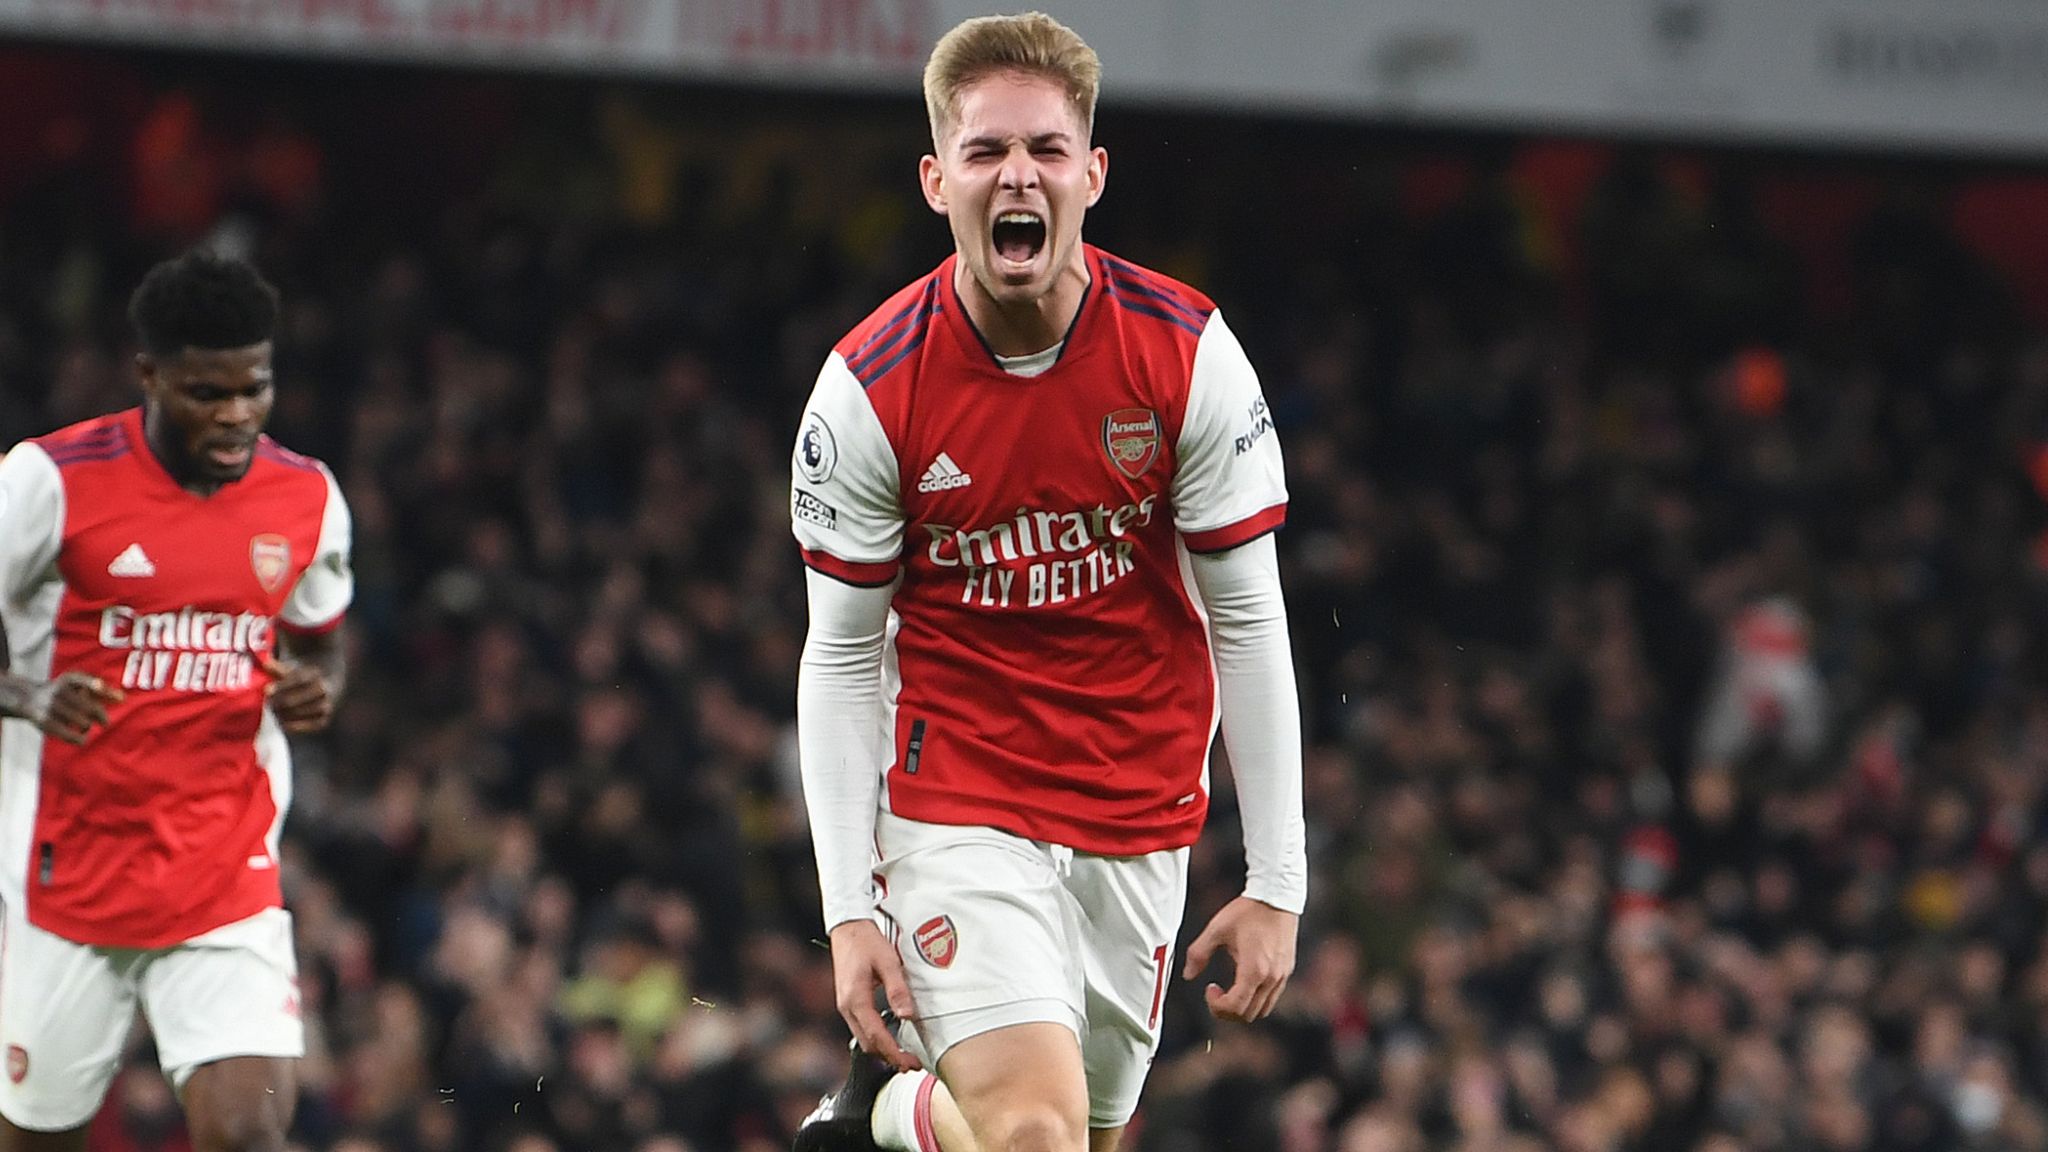 Arsenal 2-0 West Martinelli and Emile Smith Rowe help Gunners leapfrog West Ham into top four | Football News | Sky Sports